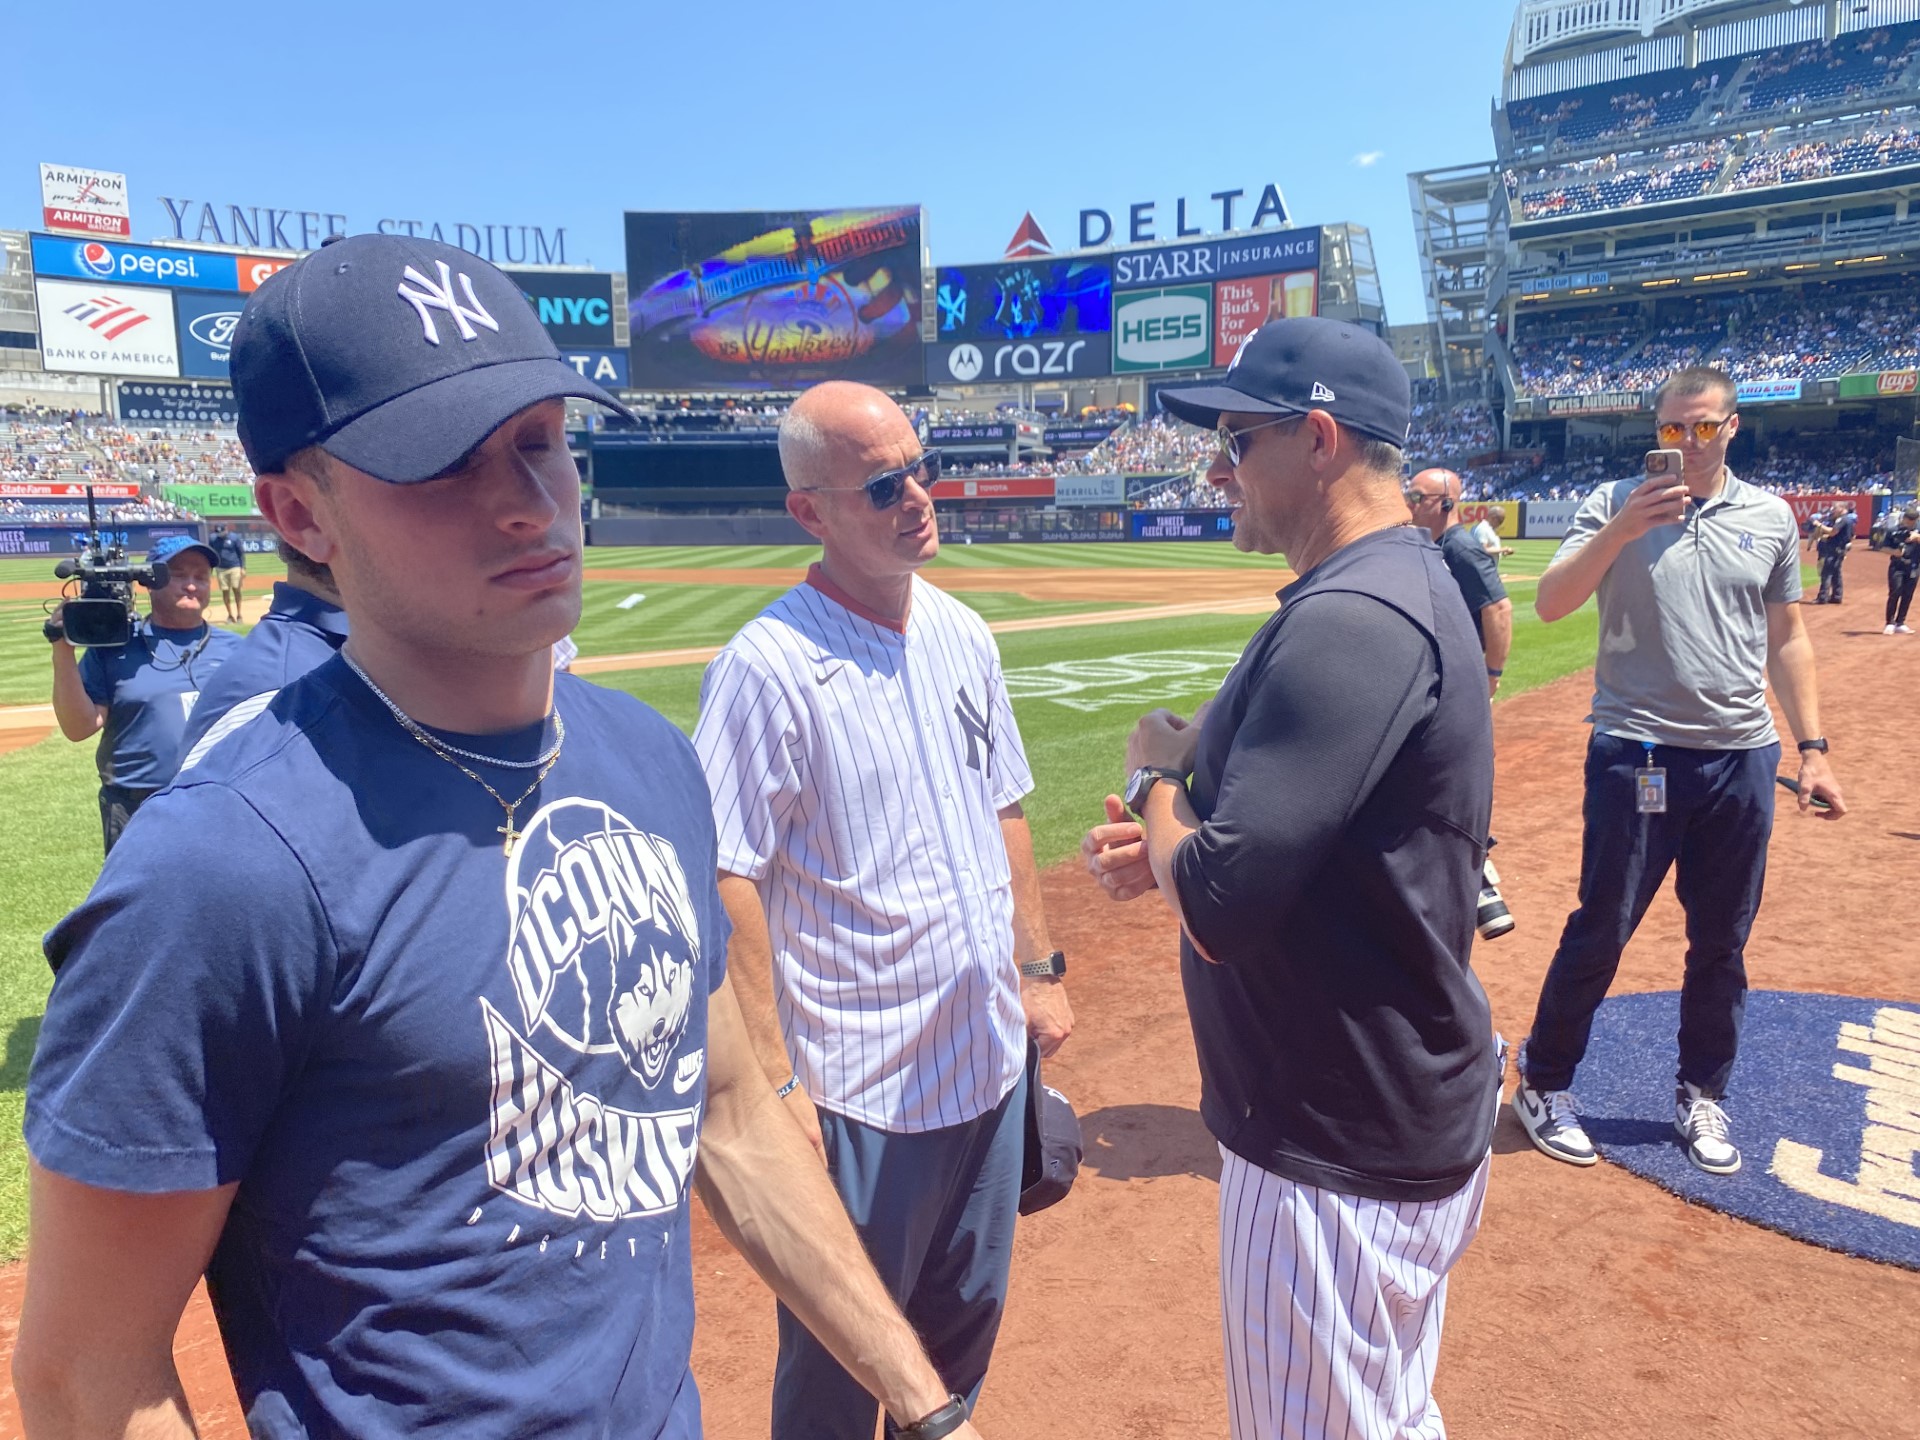 Celebrity Yankee Fans  List of Celebrities at Yankees Games